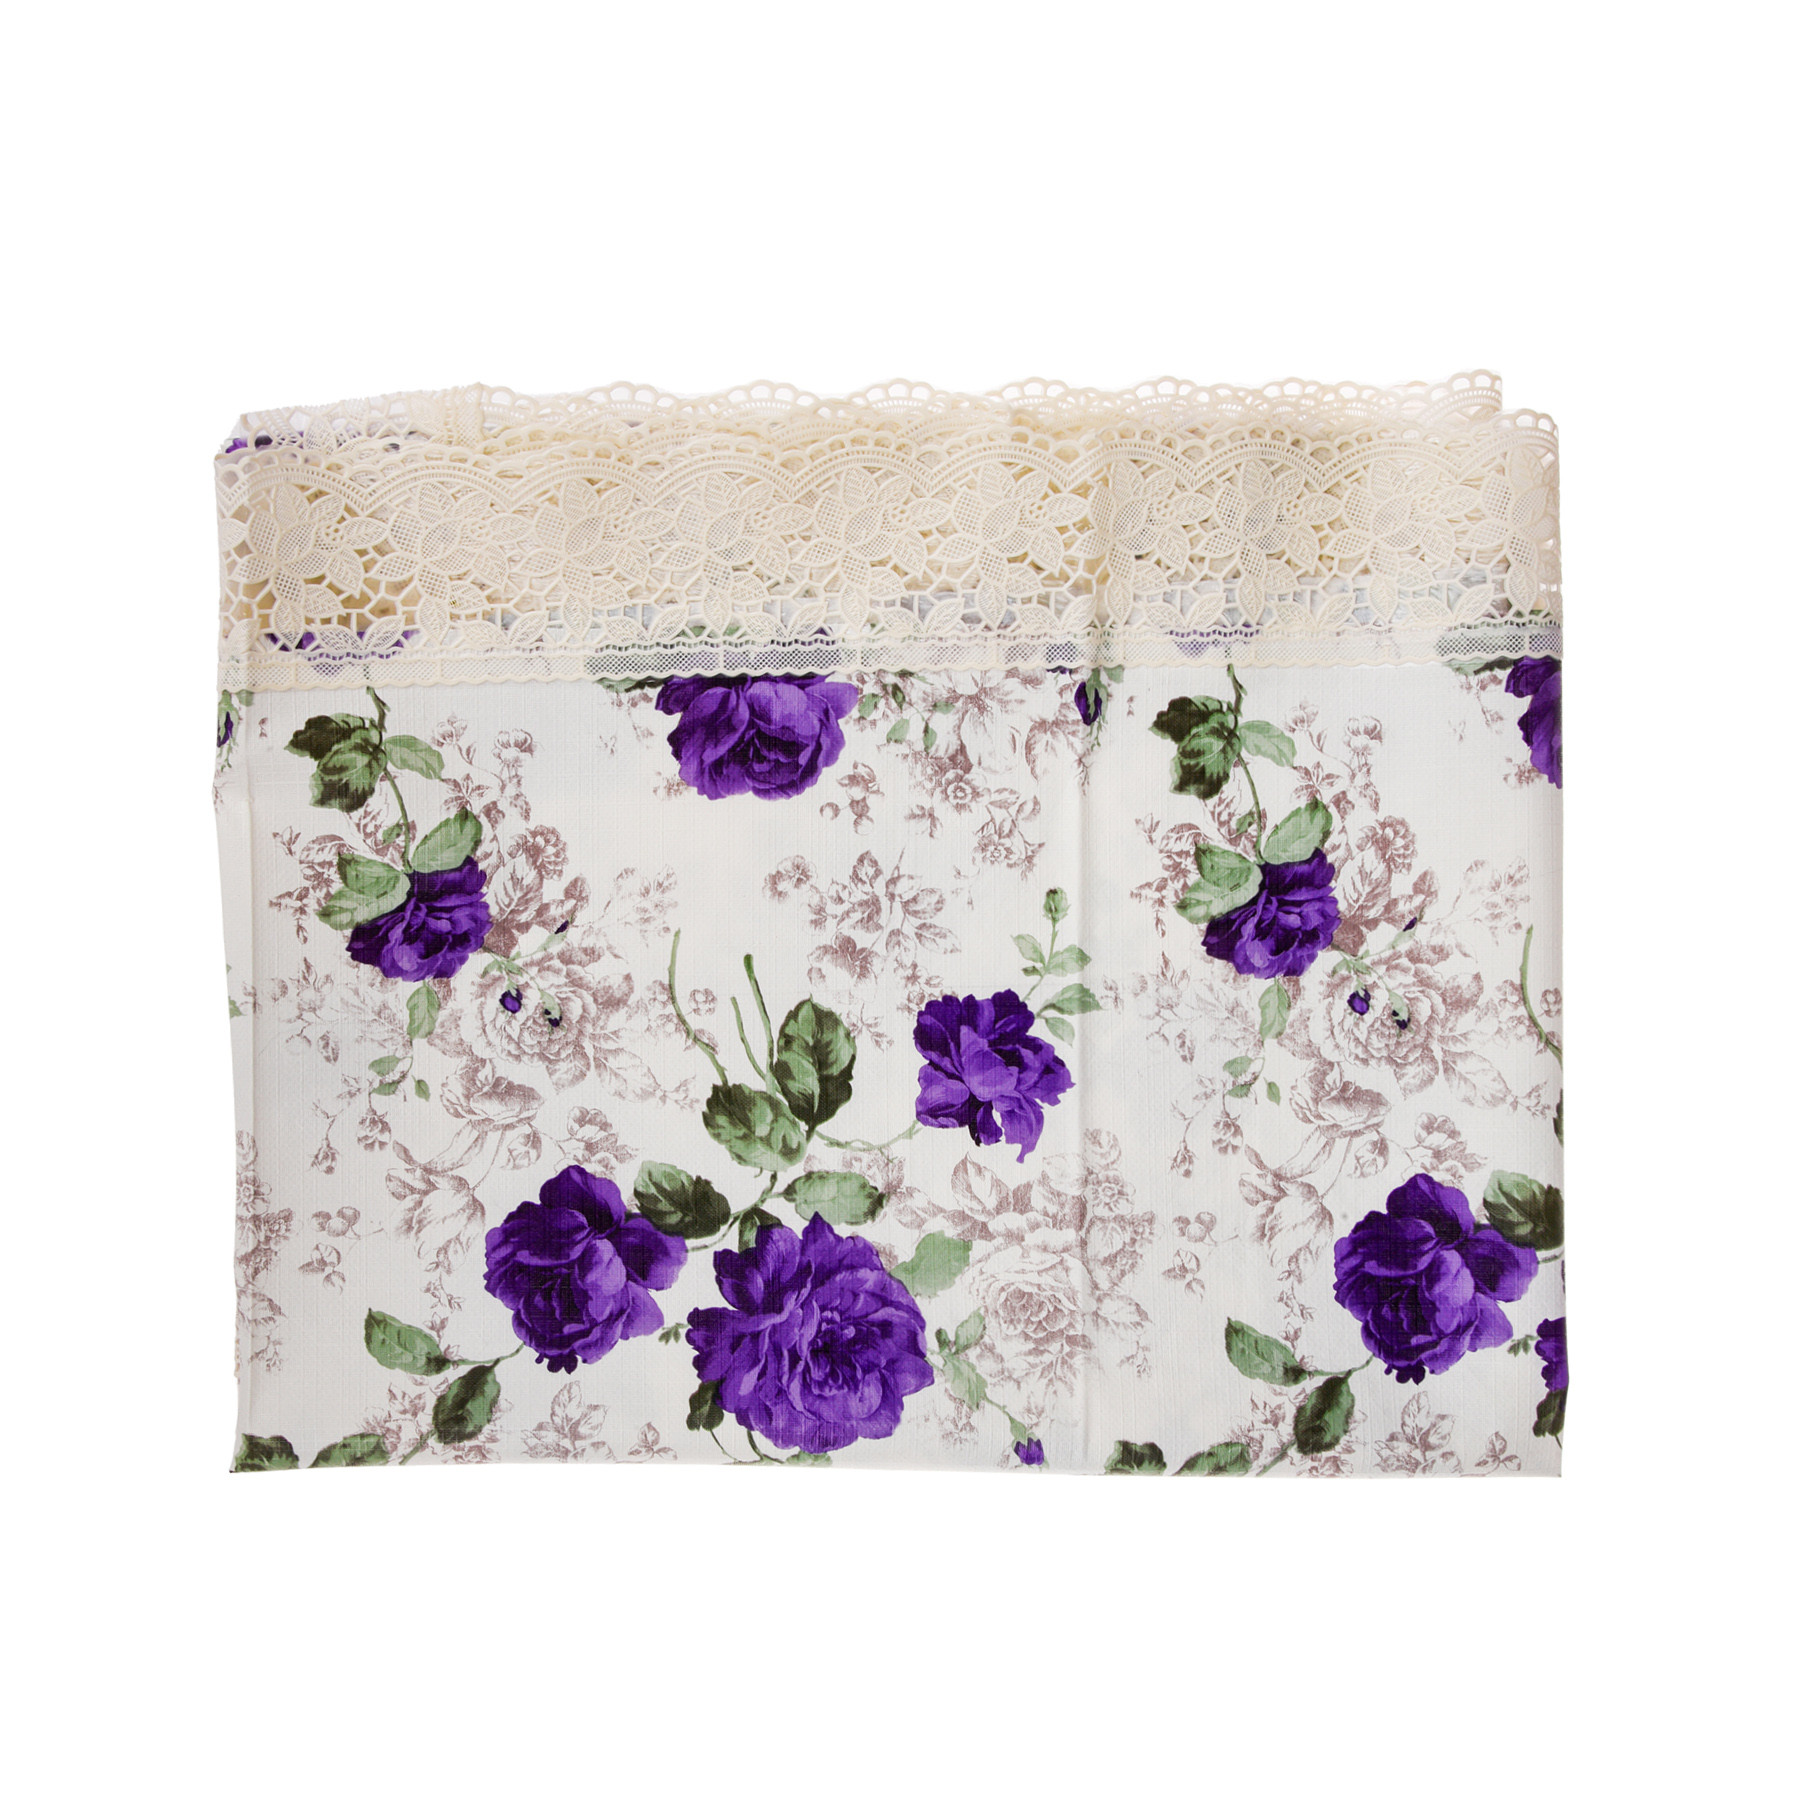 Kuber Industries Center Table Cover | PVC Table Cover | Reusable Cloth Cover for Table Top | Purple Flower Center Table Cover | Table Protector Cover | 40x60 Inch | Cream